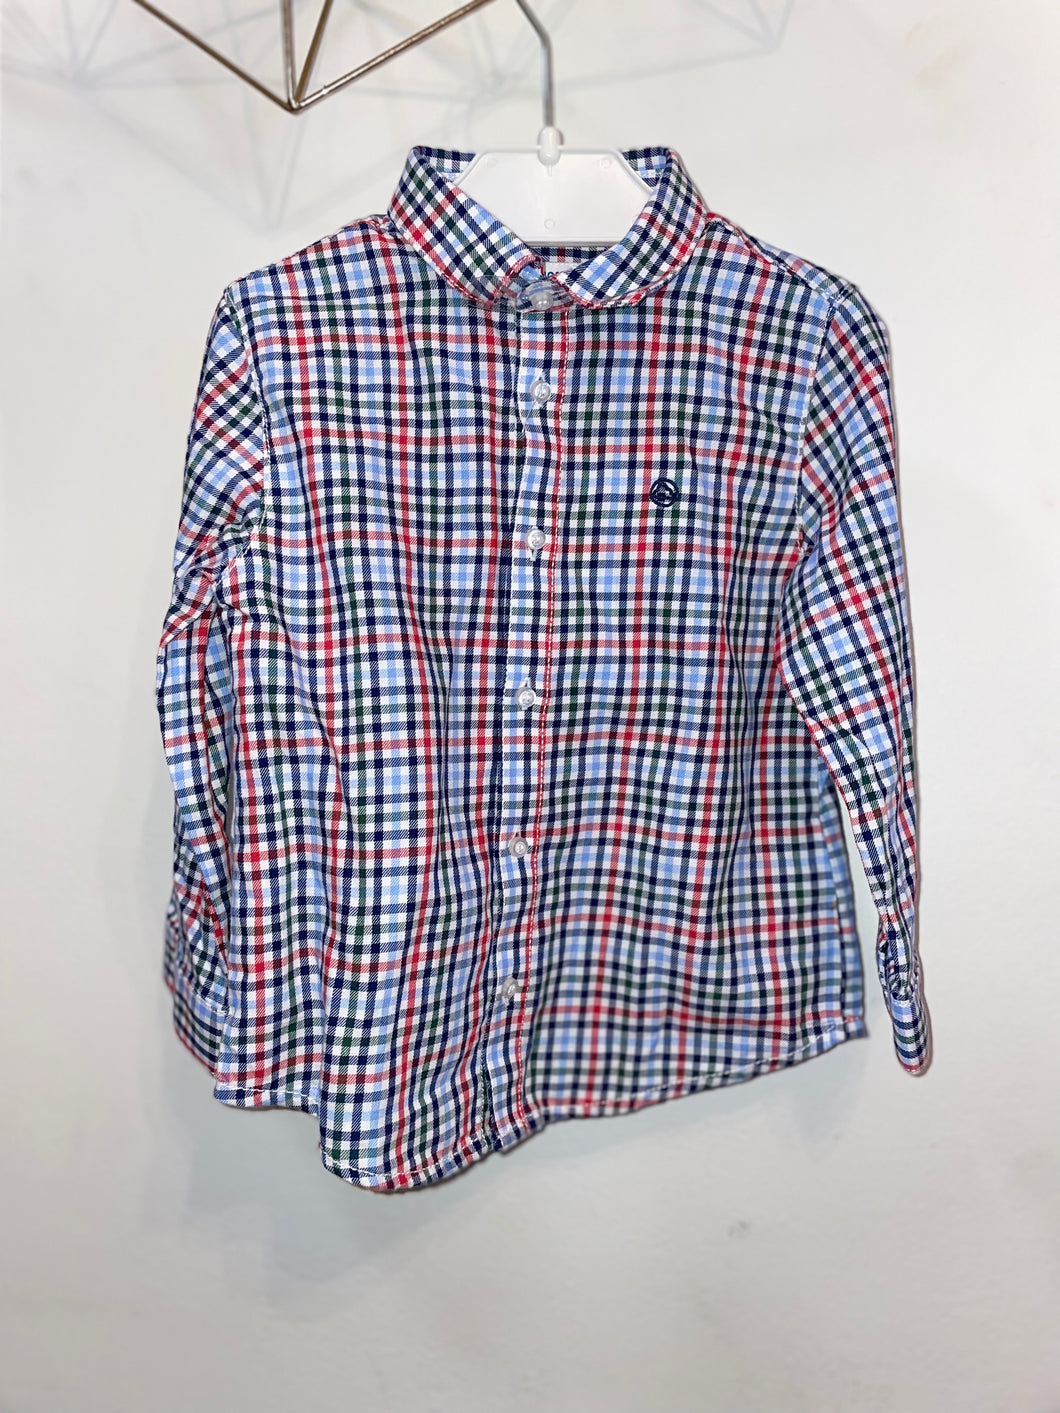 NWT Mayoral button up